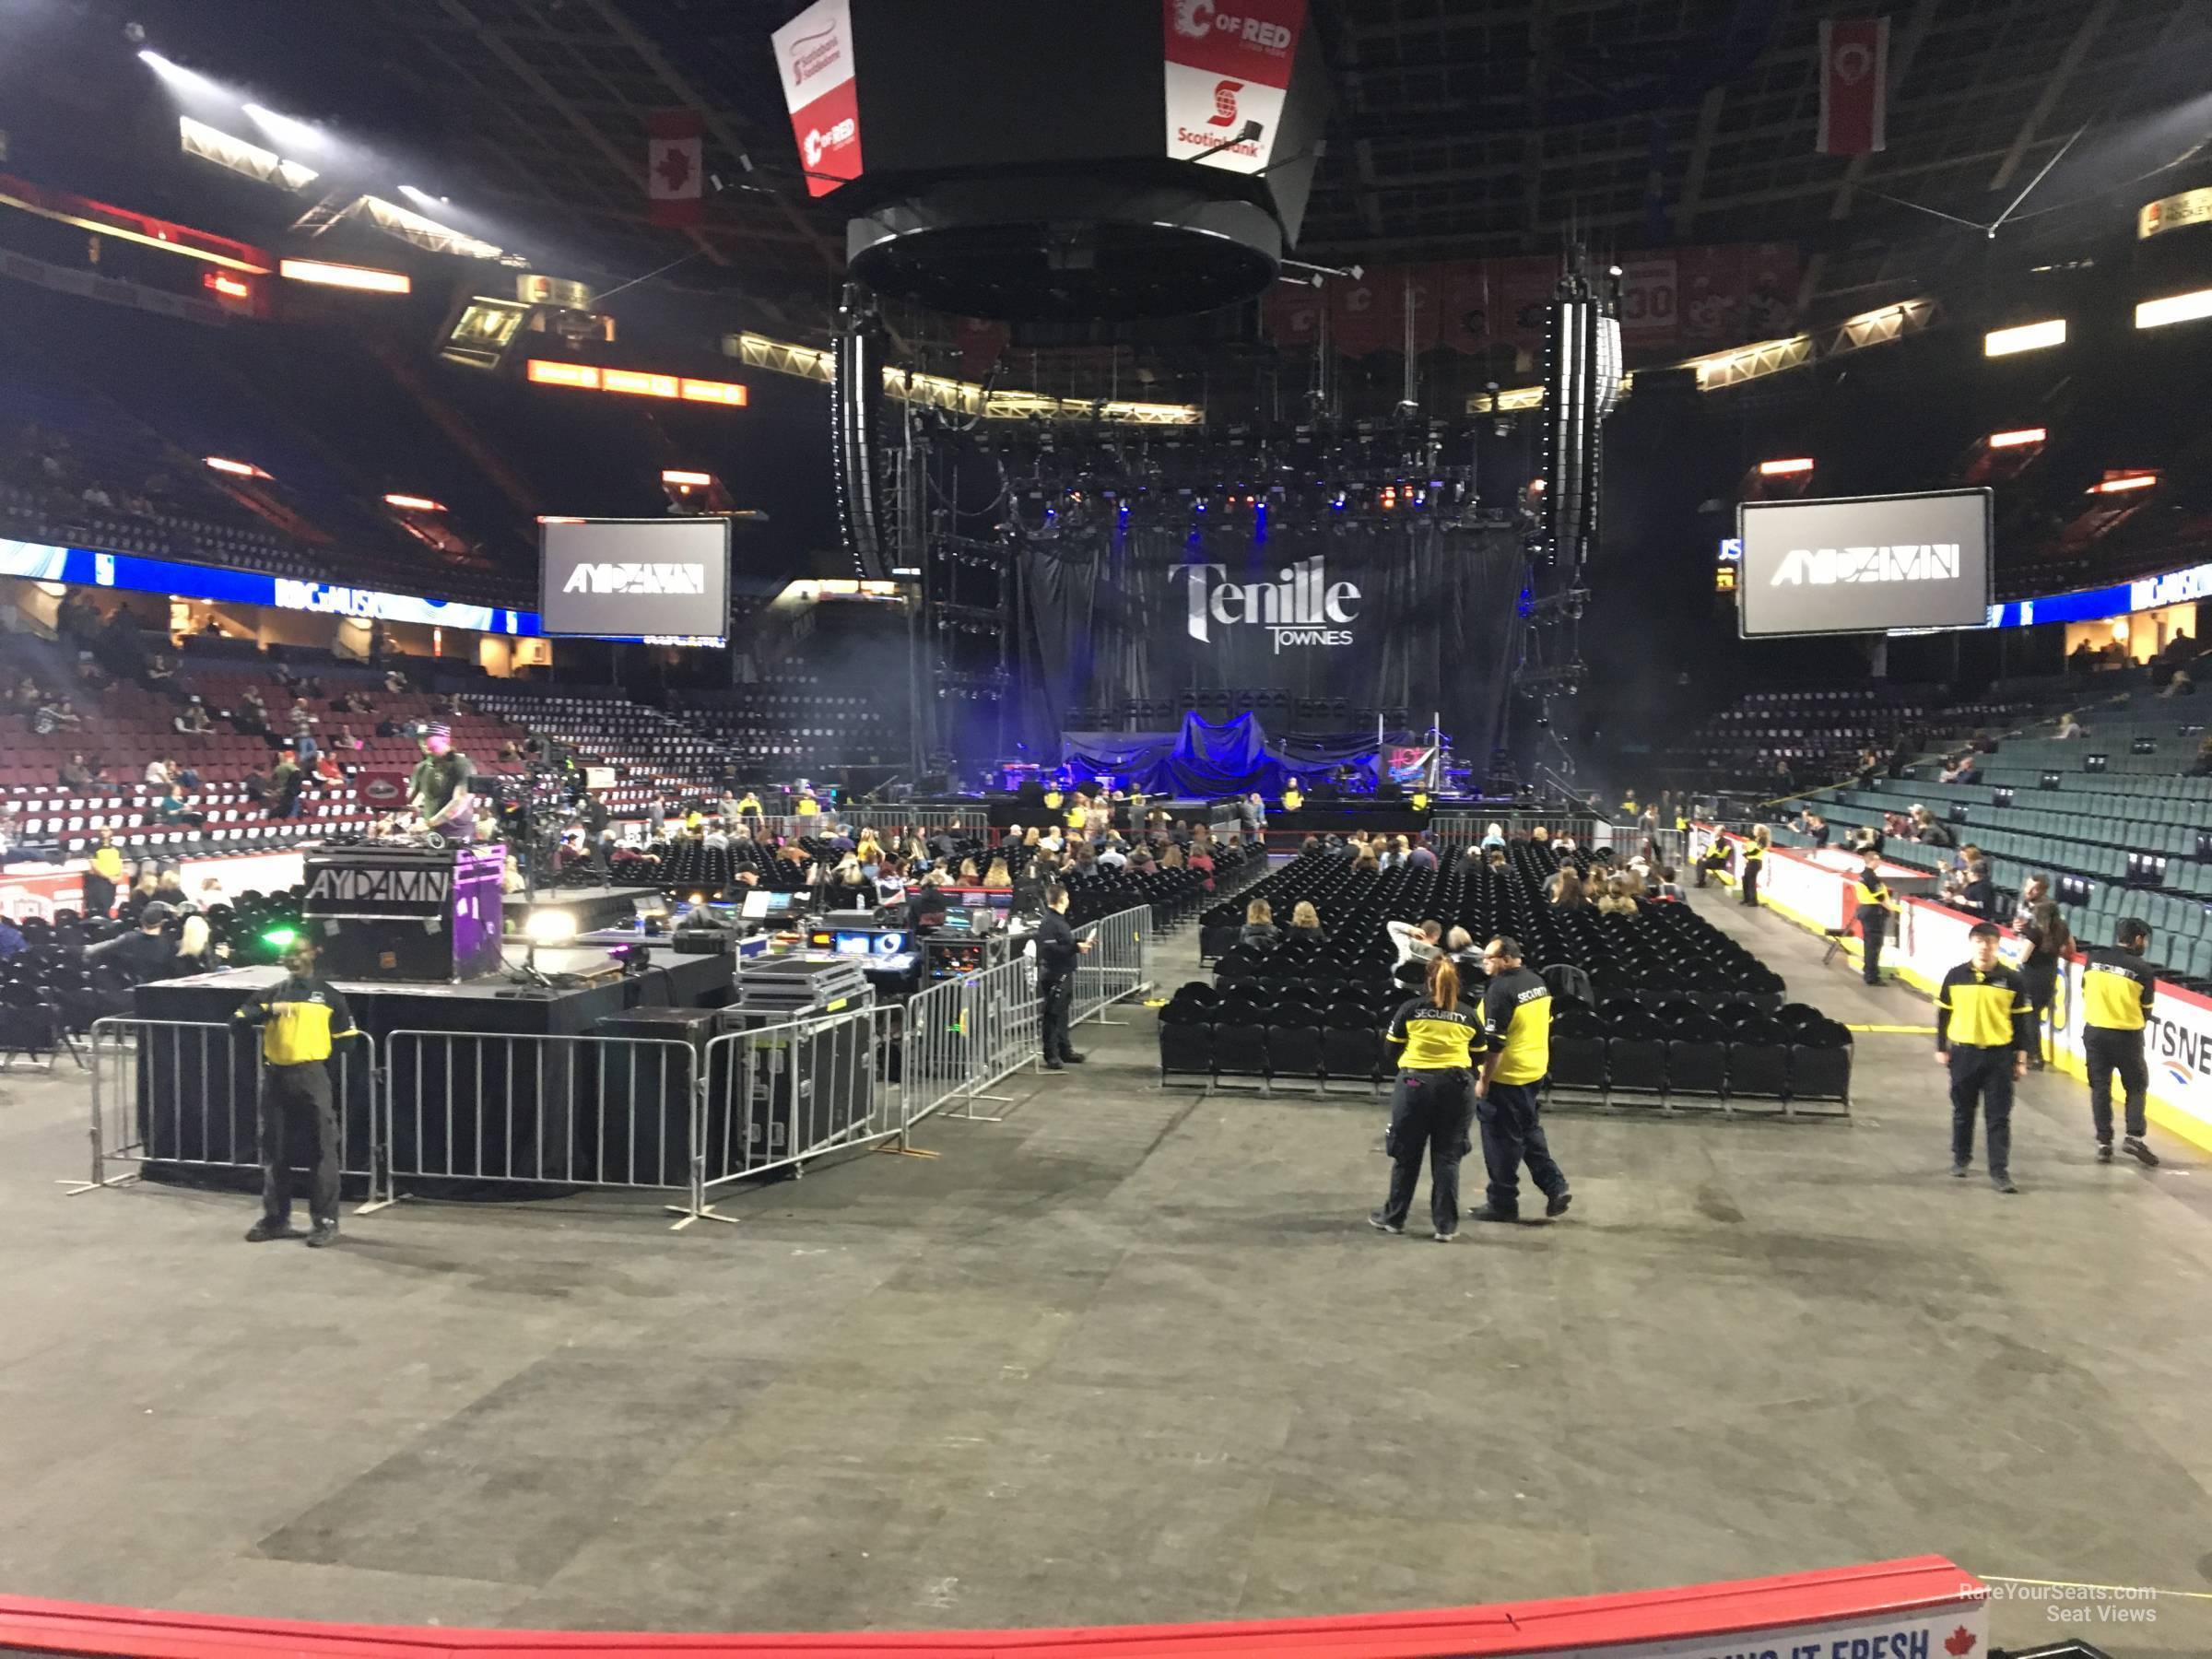 section 116, row 5 seat view  for concert - scotiabank saddledome